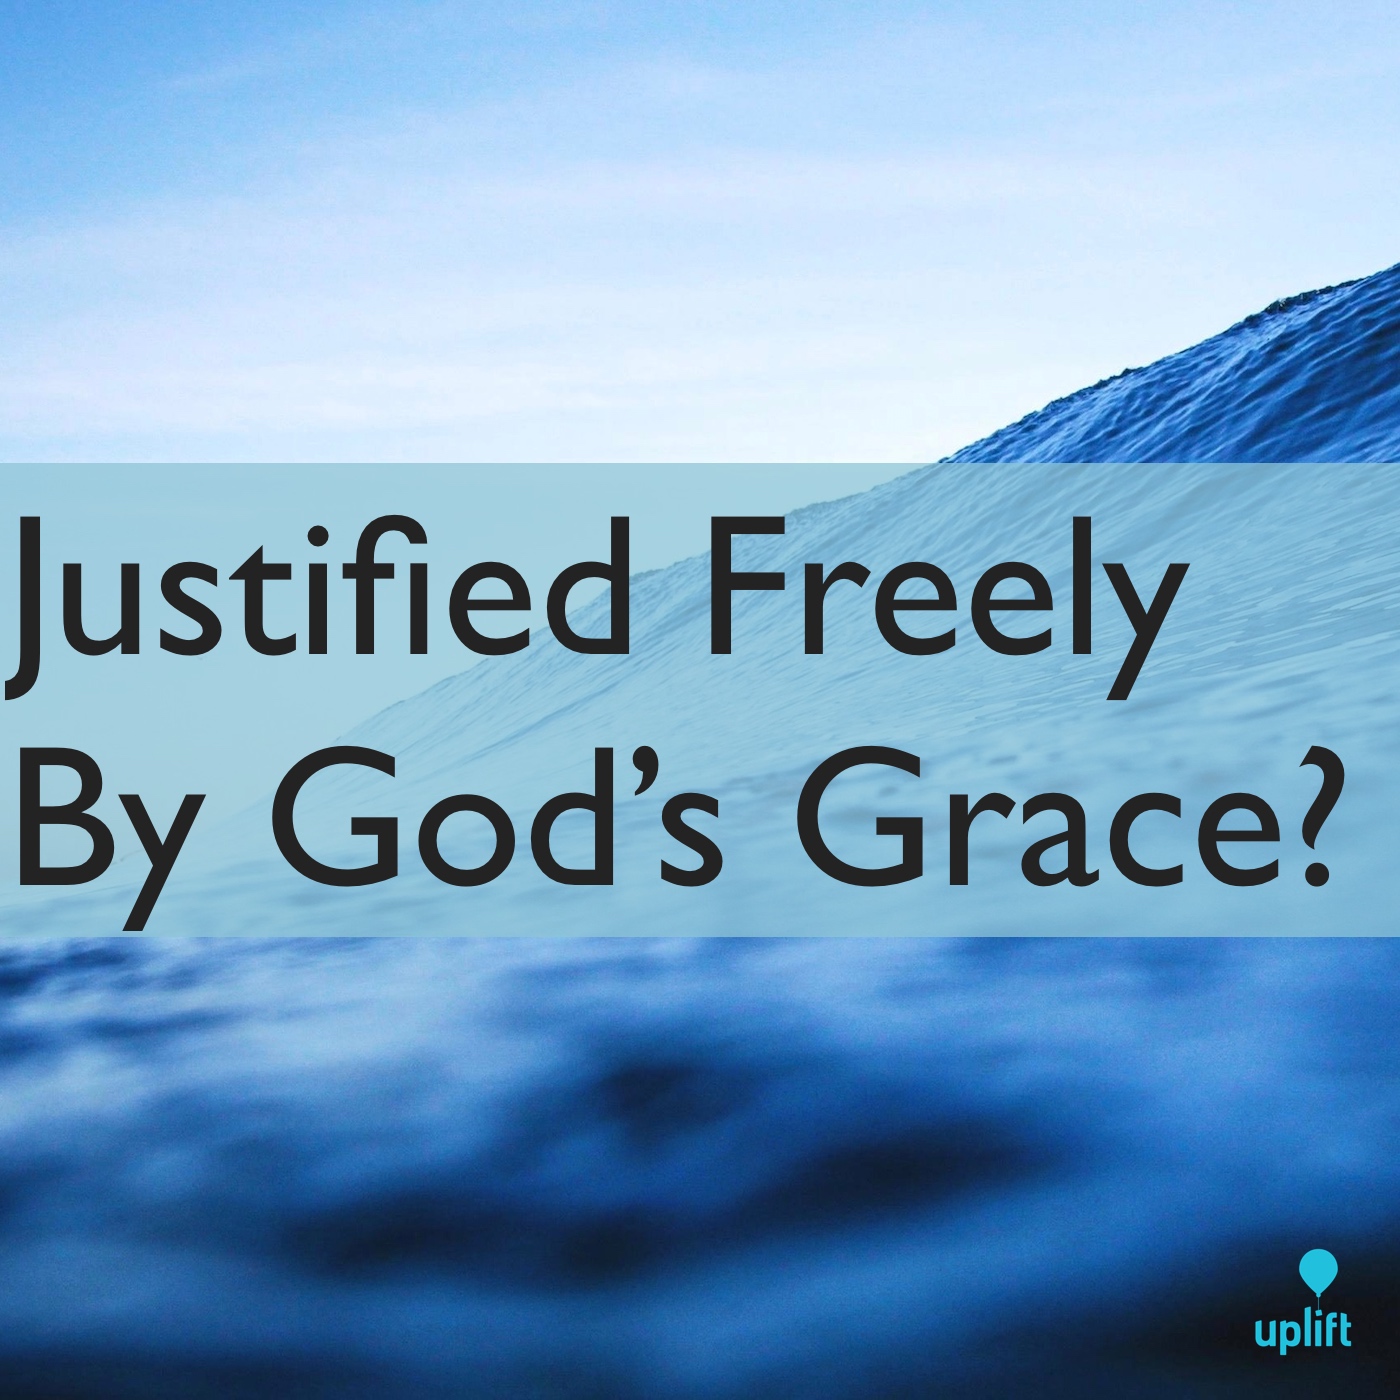 Episode 58: Justified Freely By God’s Grace?